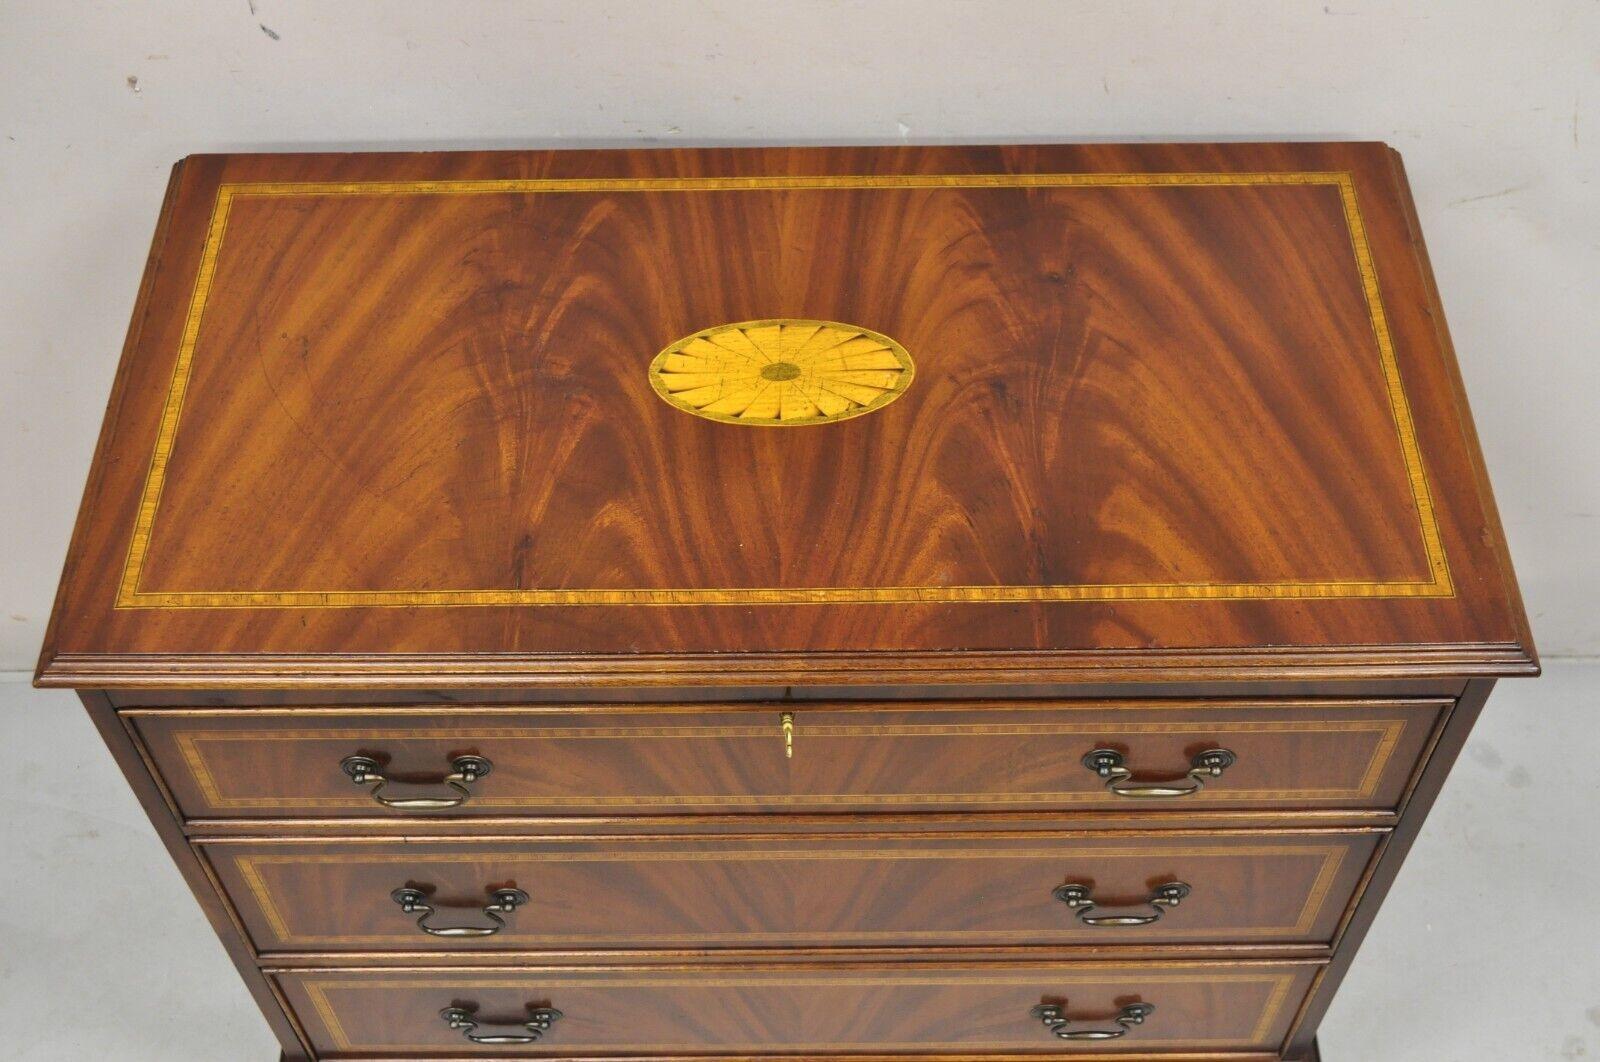 Vintage English Edwardian Style Mahogany Pinwheel Inlay 3 Drawer Dresser Chest. Item features 3 dovetailed drawers, banded inlay top and drawer fronts, crotch mahogany wood grain, pinwheel central inlay, very nice vintage chest. Circa Mid to Late